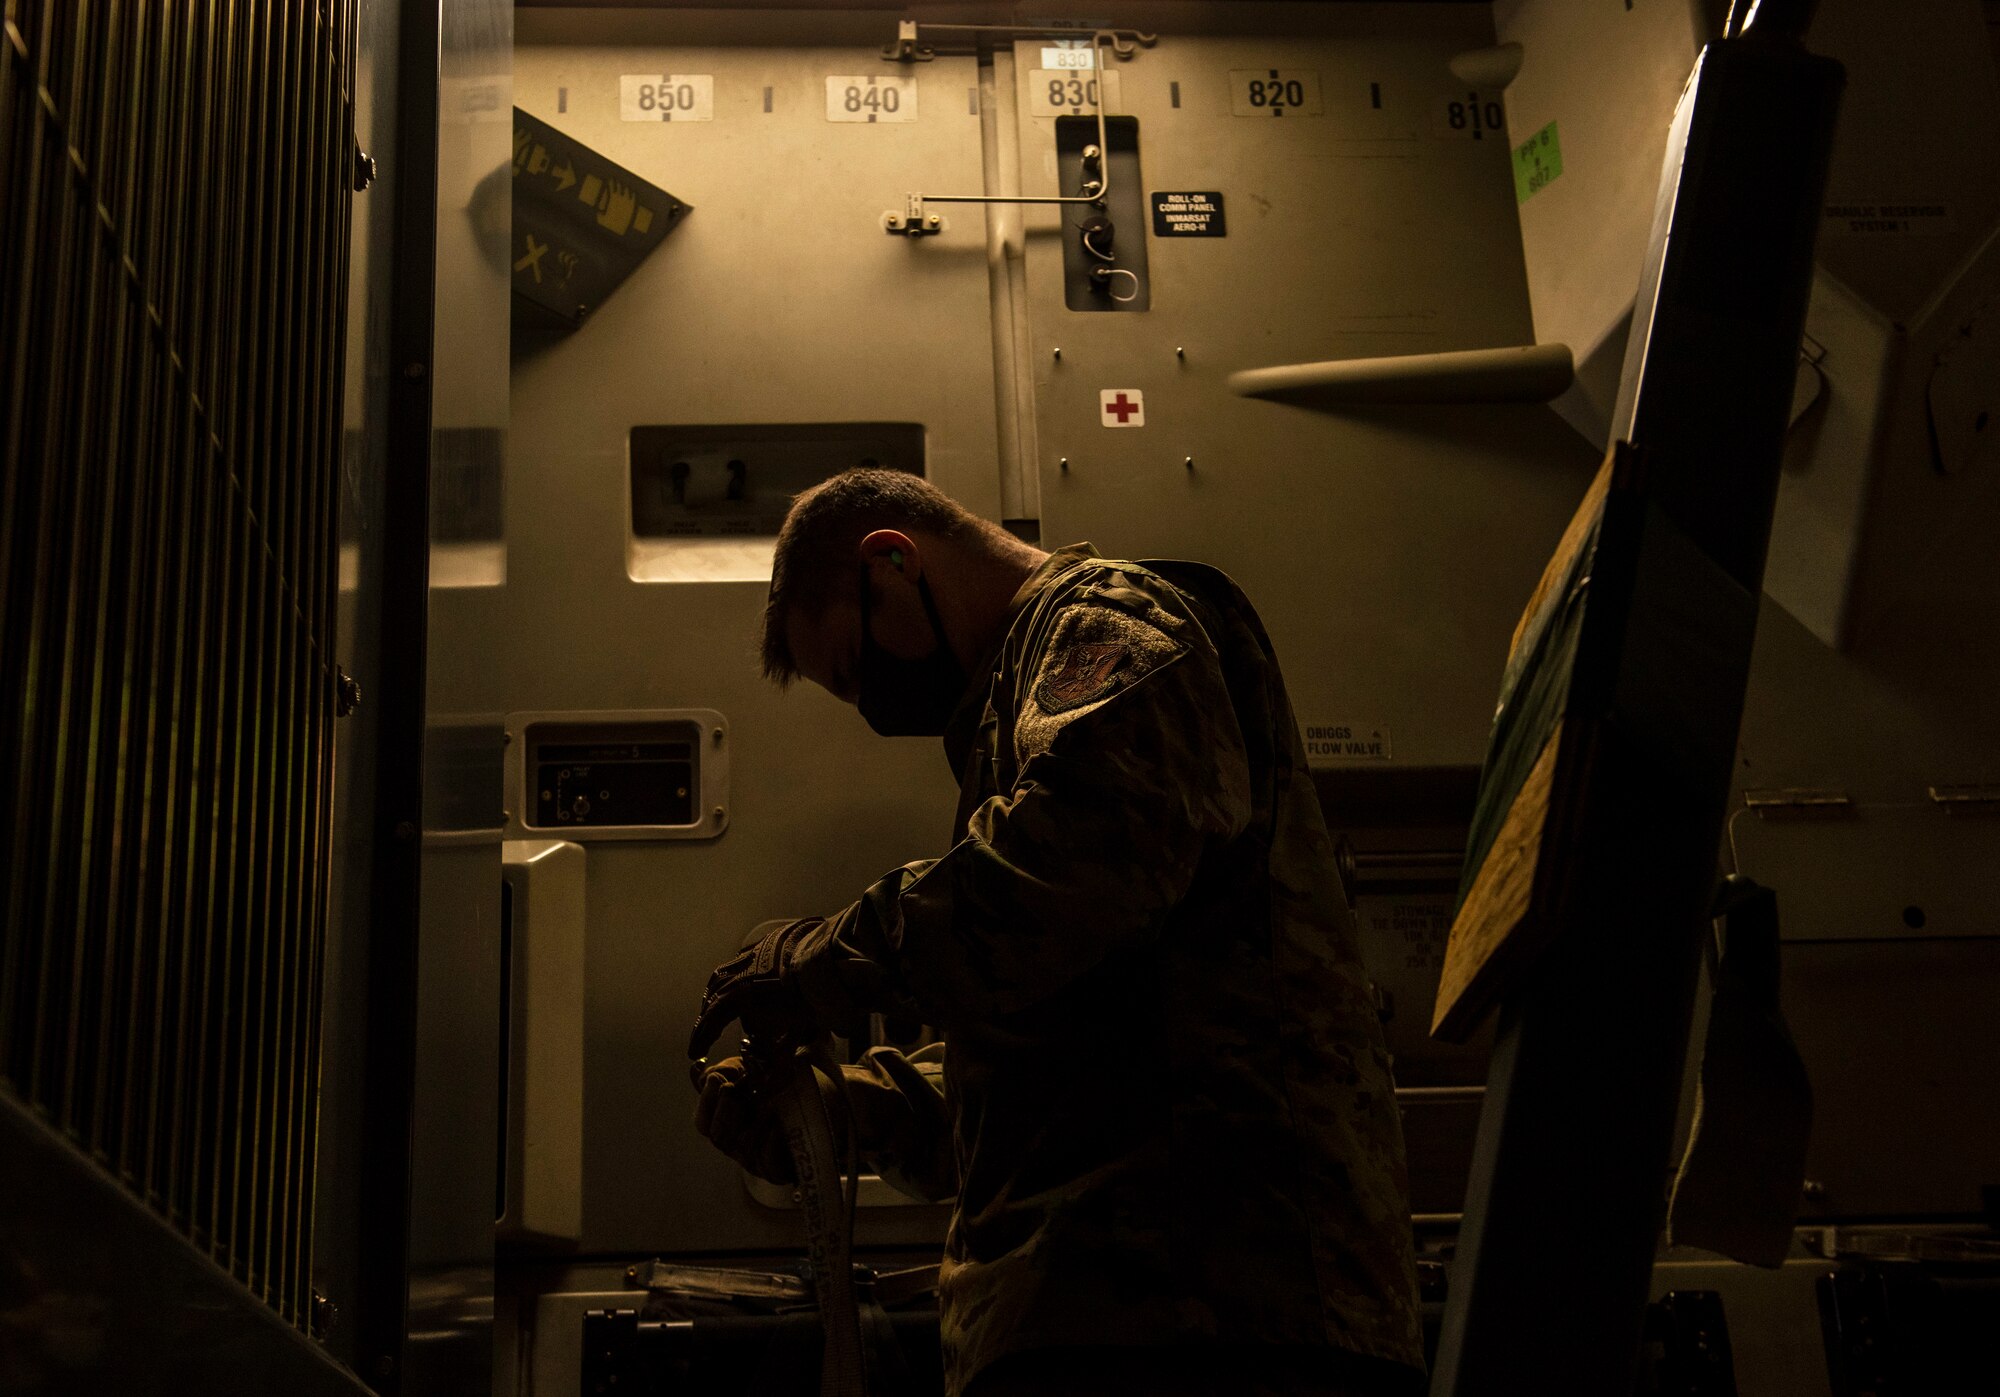 Master Sgt. Gregory Roush, 7th Logistics Readiness Squadron incoming air transportation function section chief, puts together cargo straps inside a C-17 Globemaster III at Dyess Air Force Base, Texas, Nov. 25, 2020.